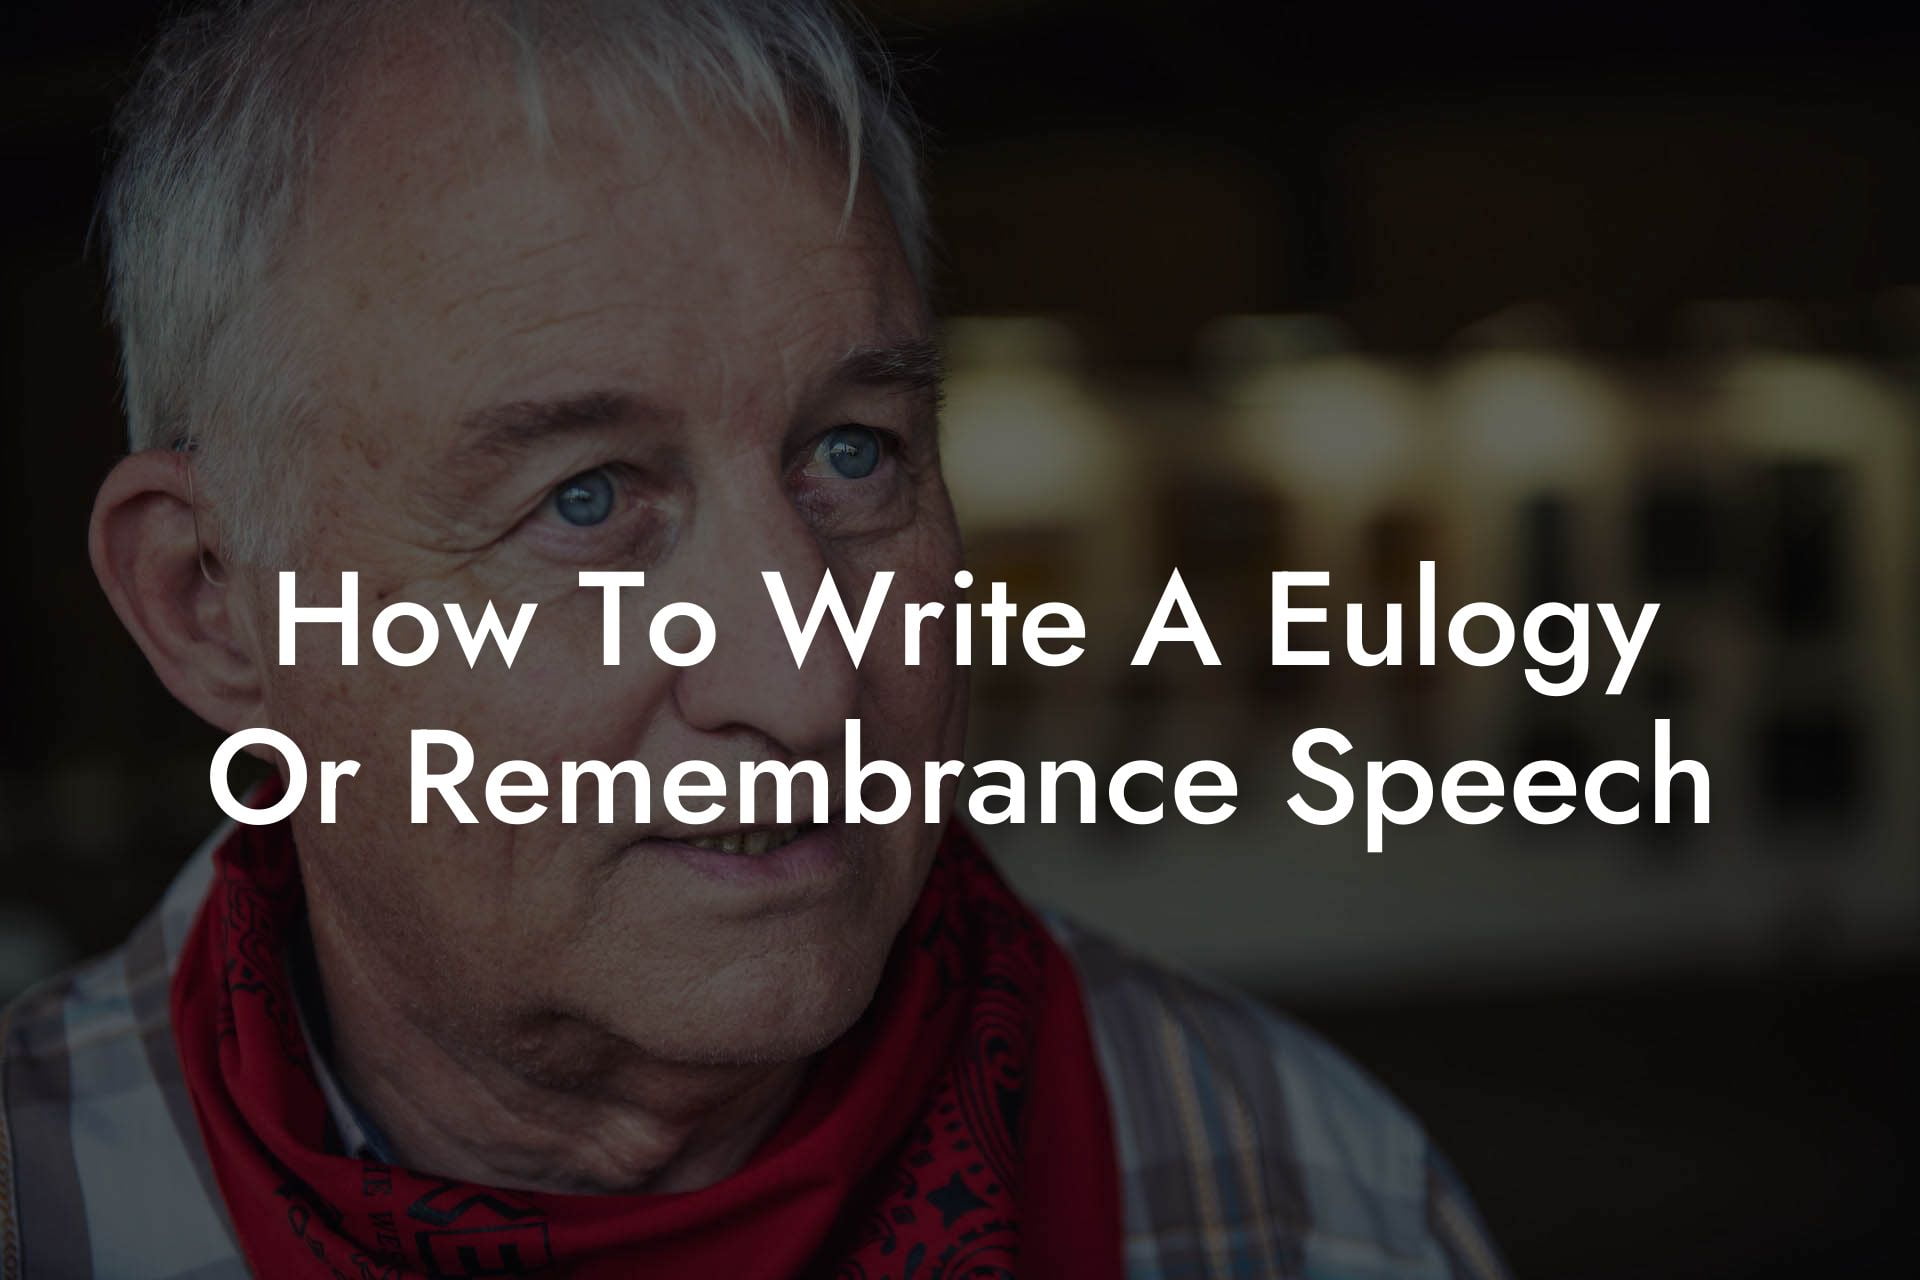 How To Write A Eulogy Or Remembrance Speech